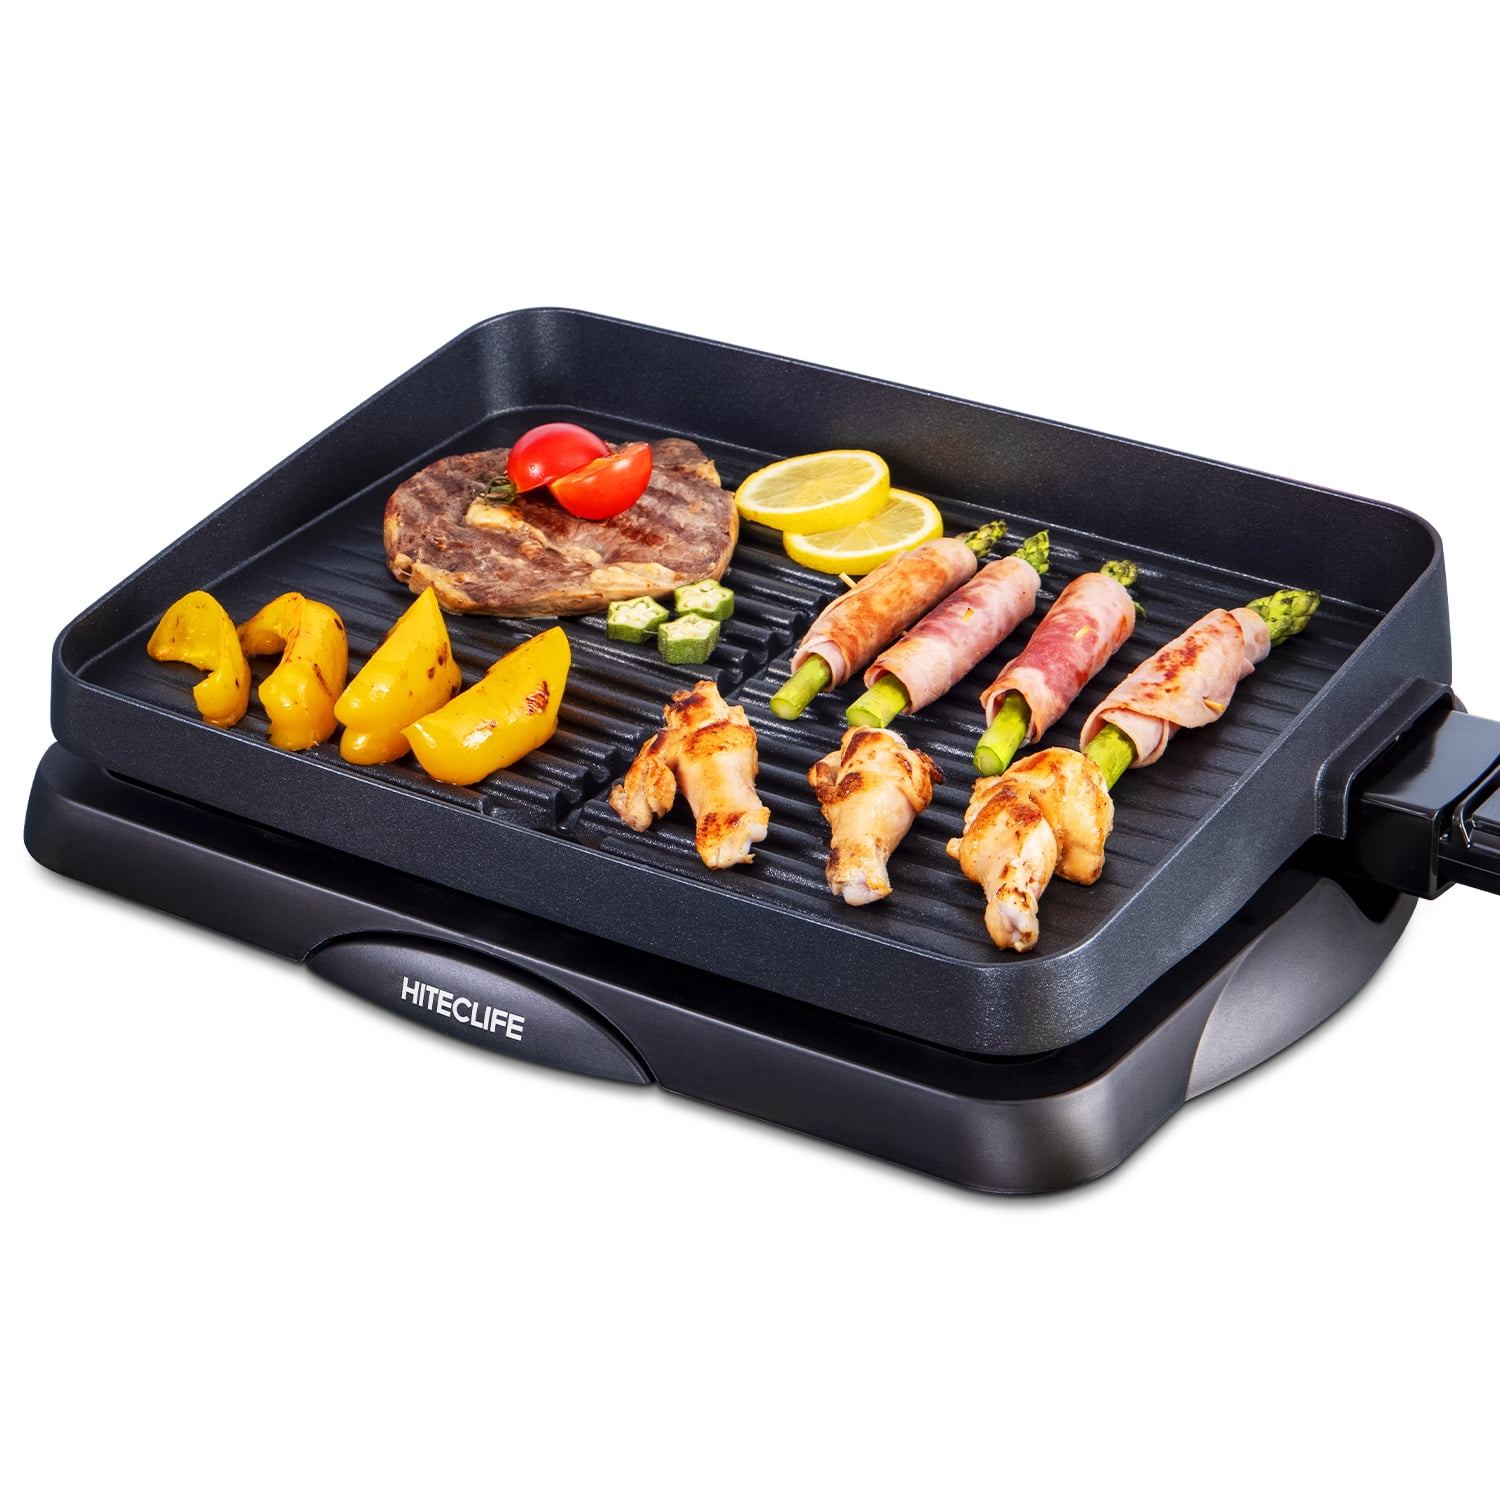 JML Grill Circle Indoor Grill & Griddle Healthy Non-Stick Hotplate Barbecue BBQ 